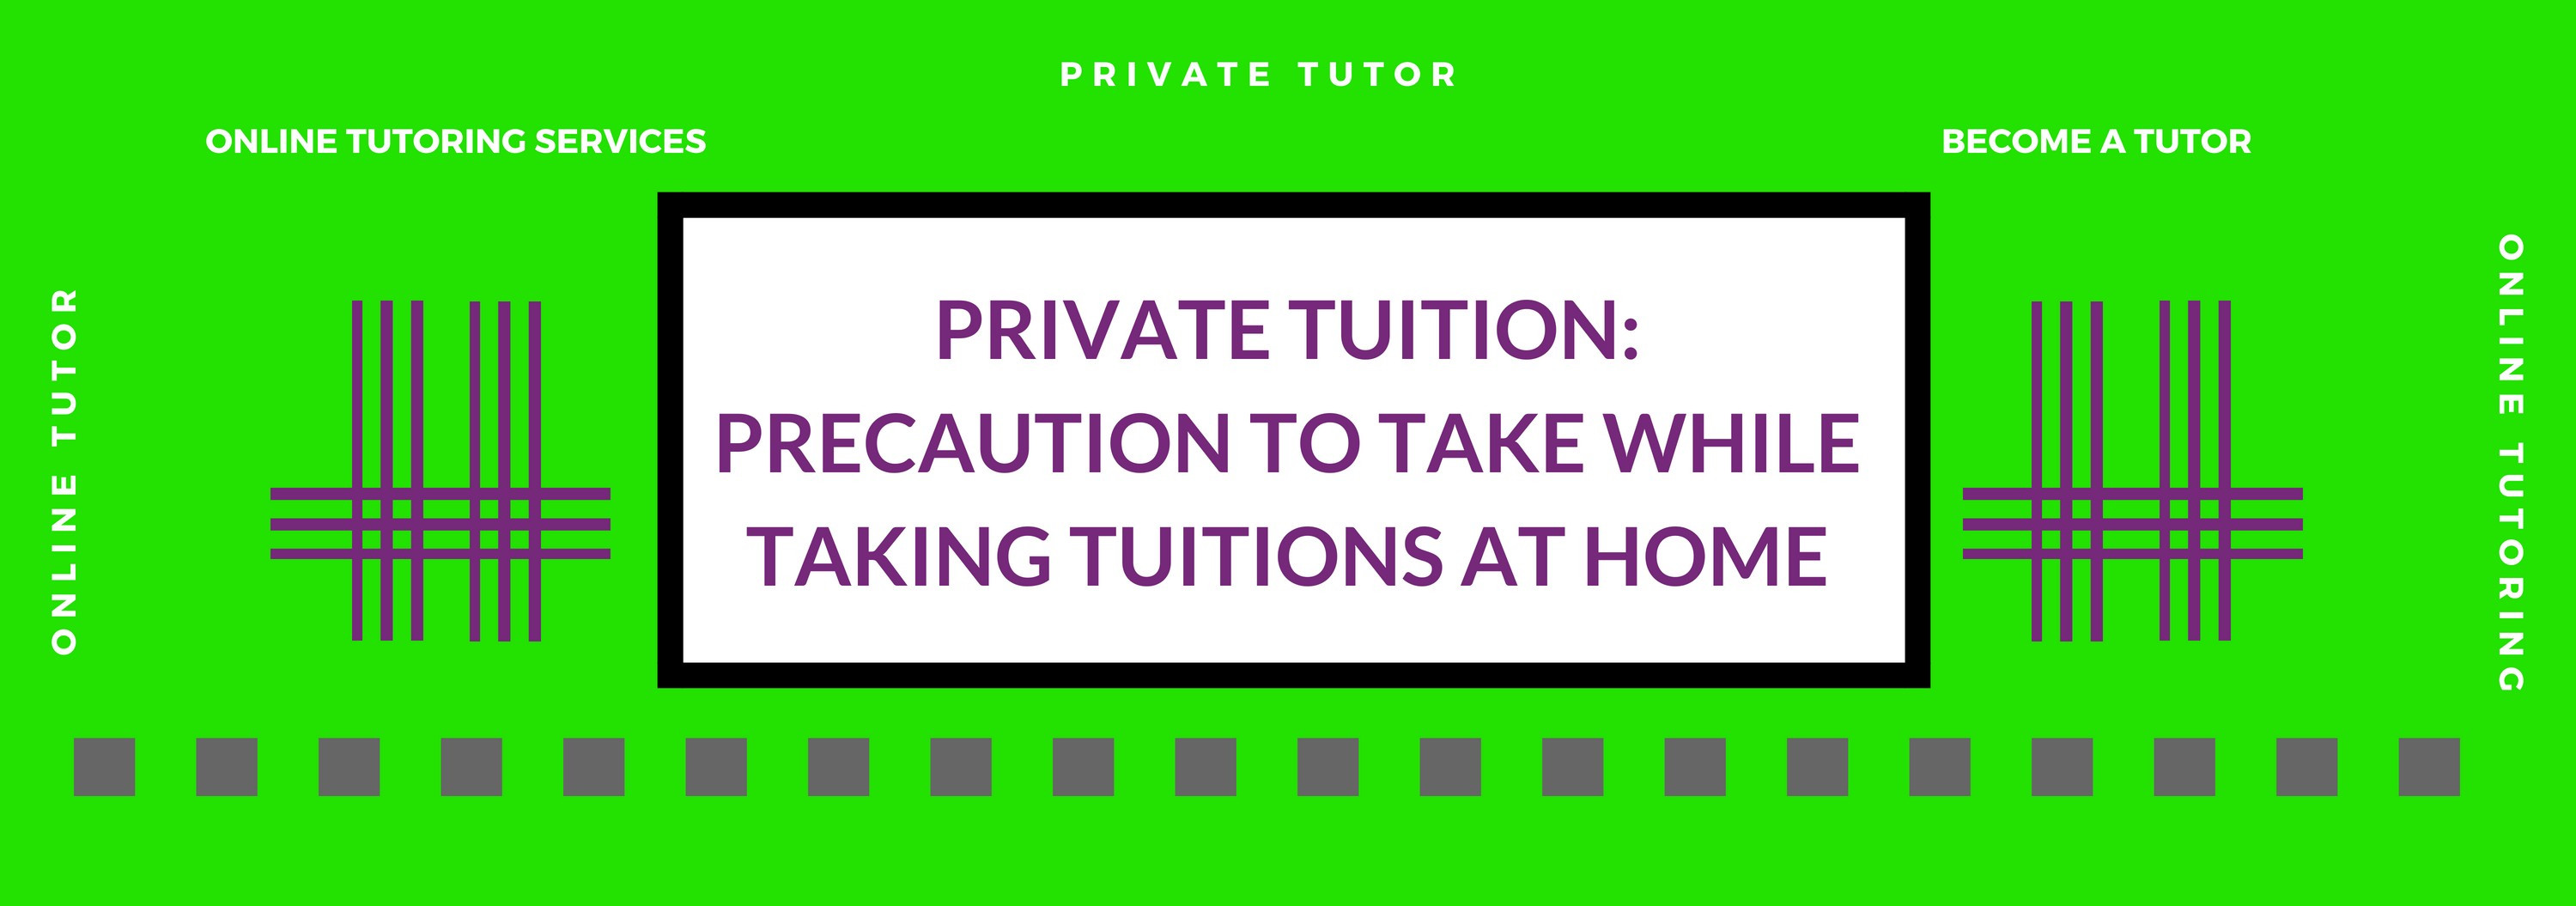 Private tuition: Precaution to take while taking tuitions at home